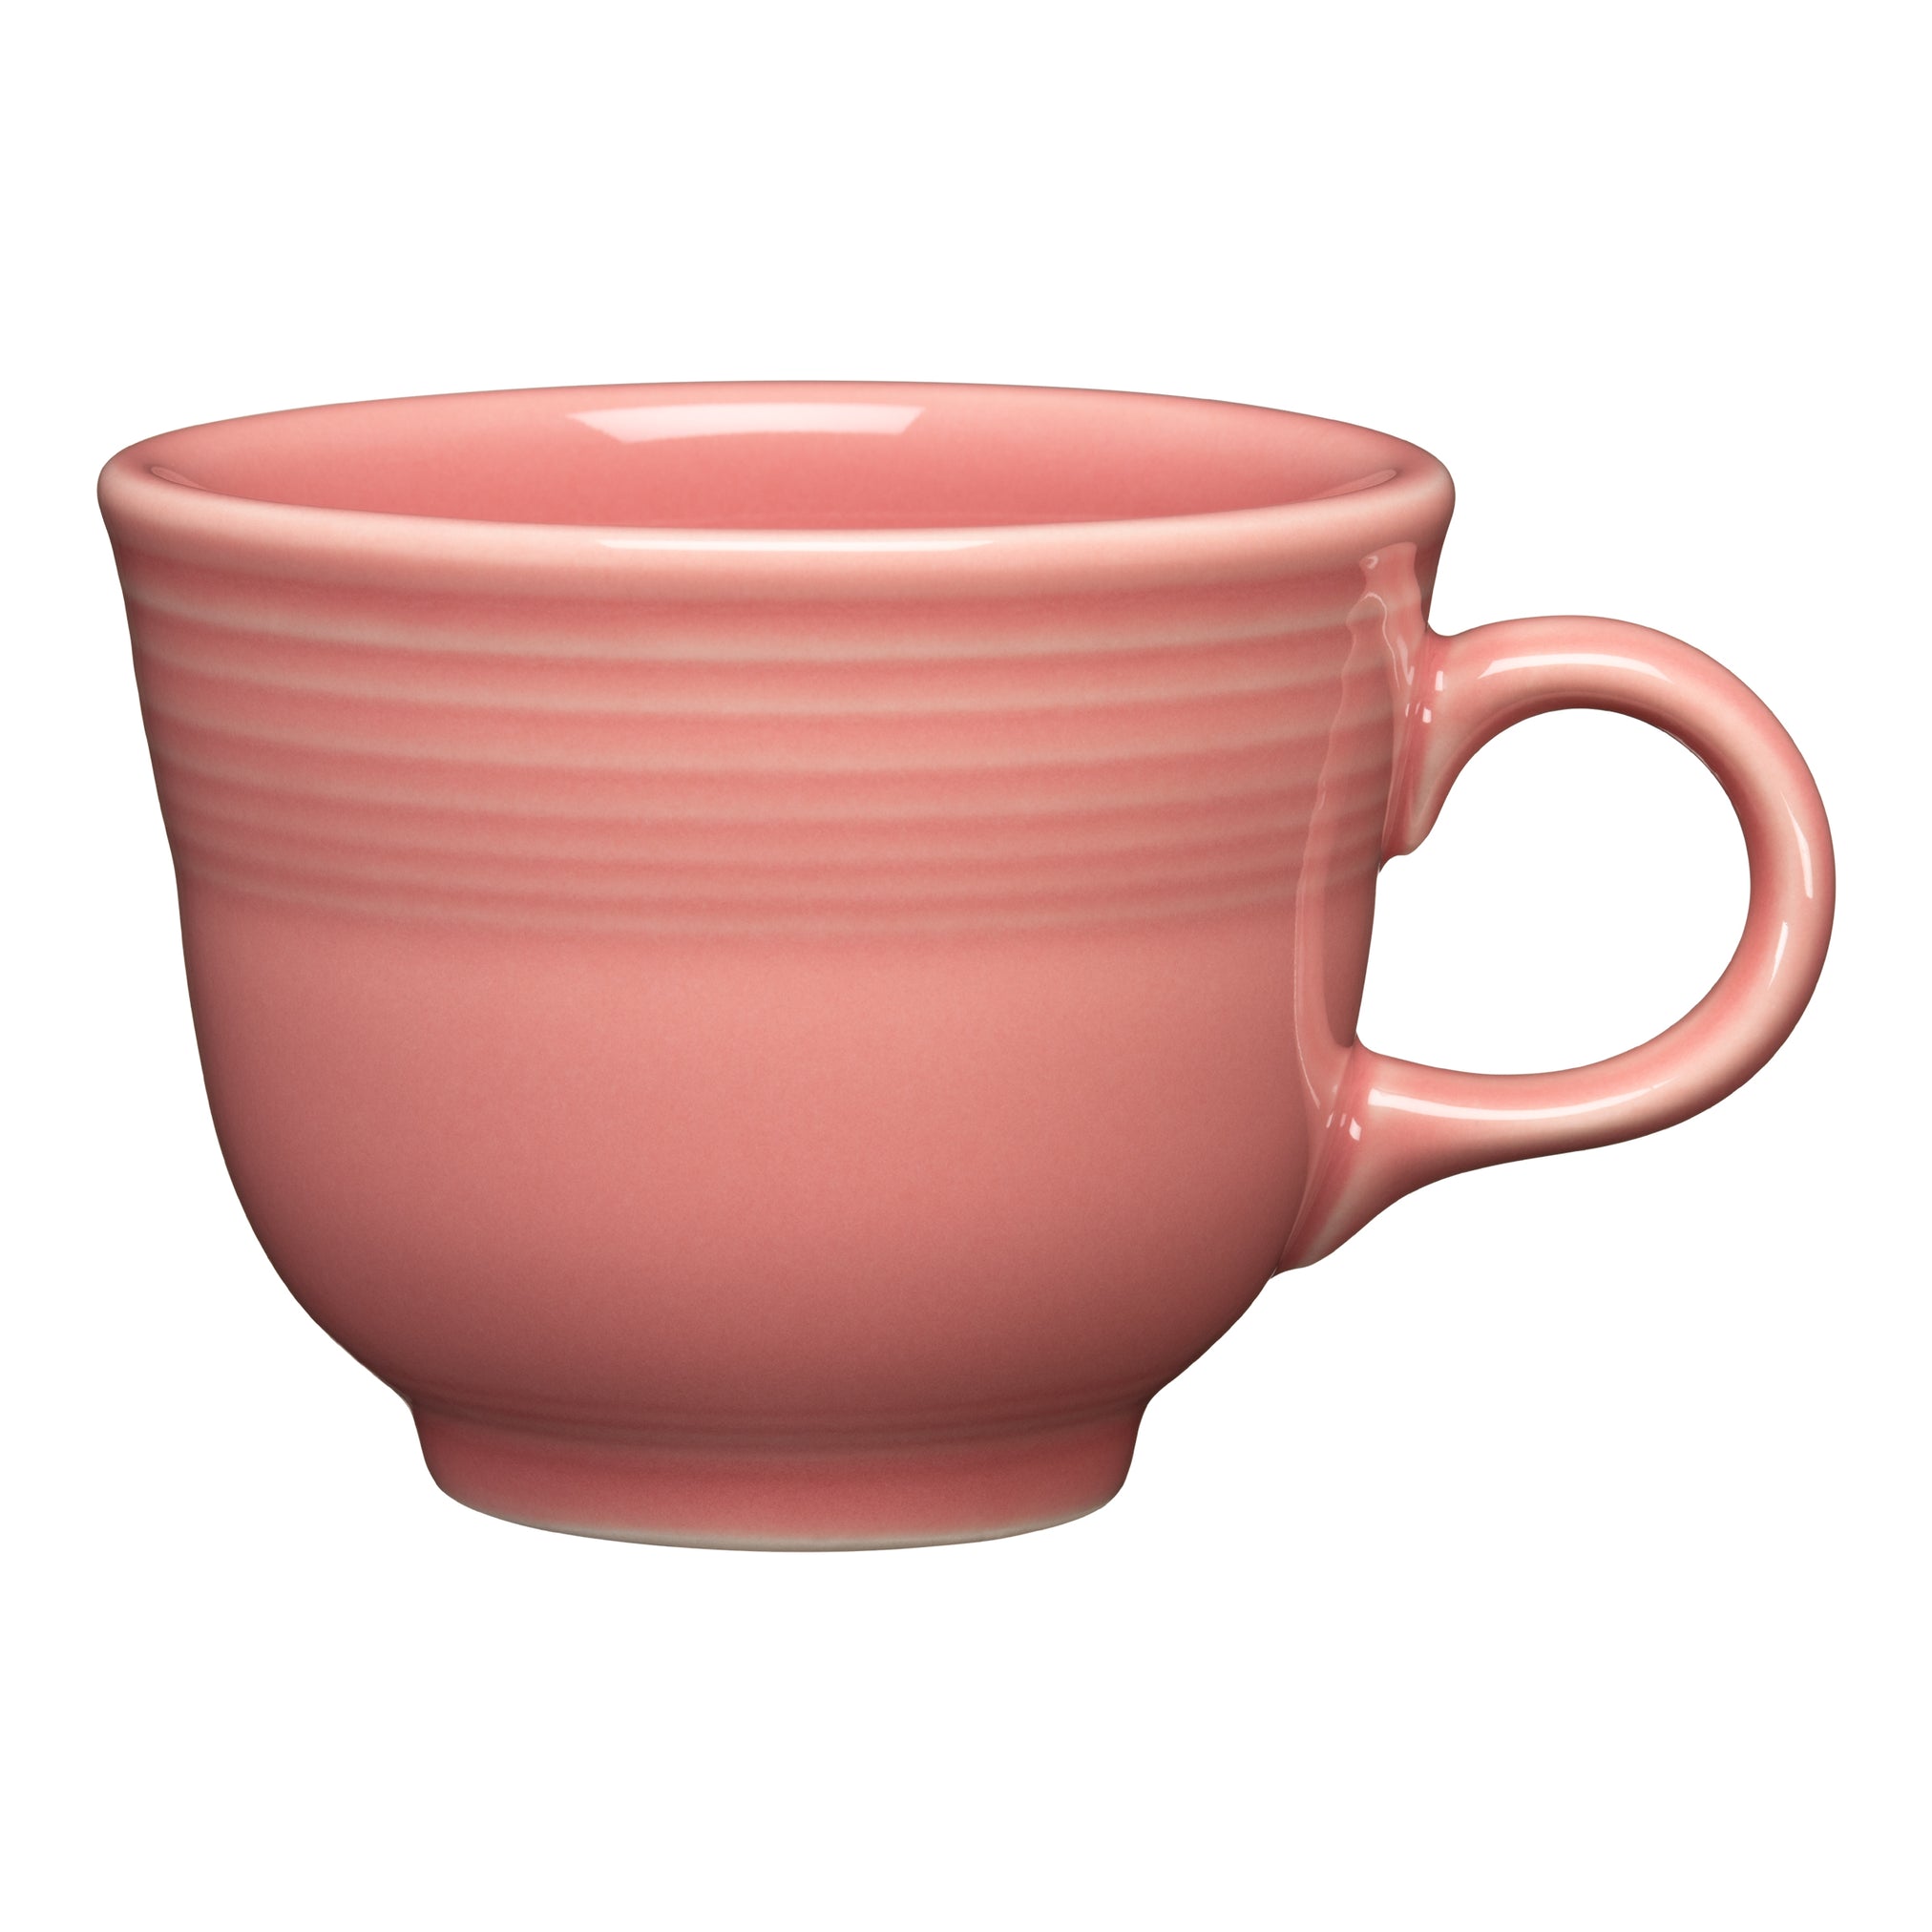 Small cups and mugs - Accessories - Products